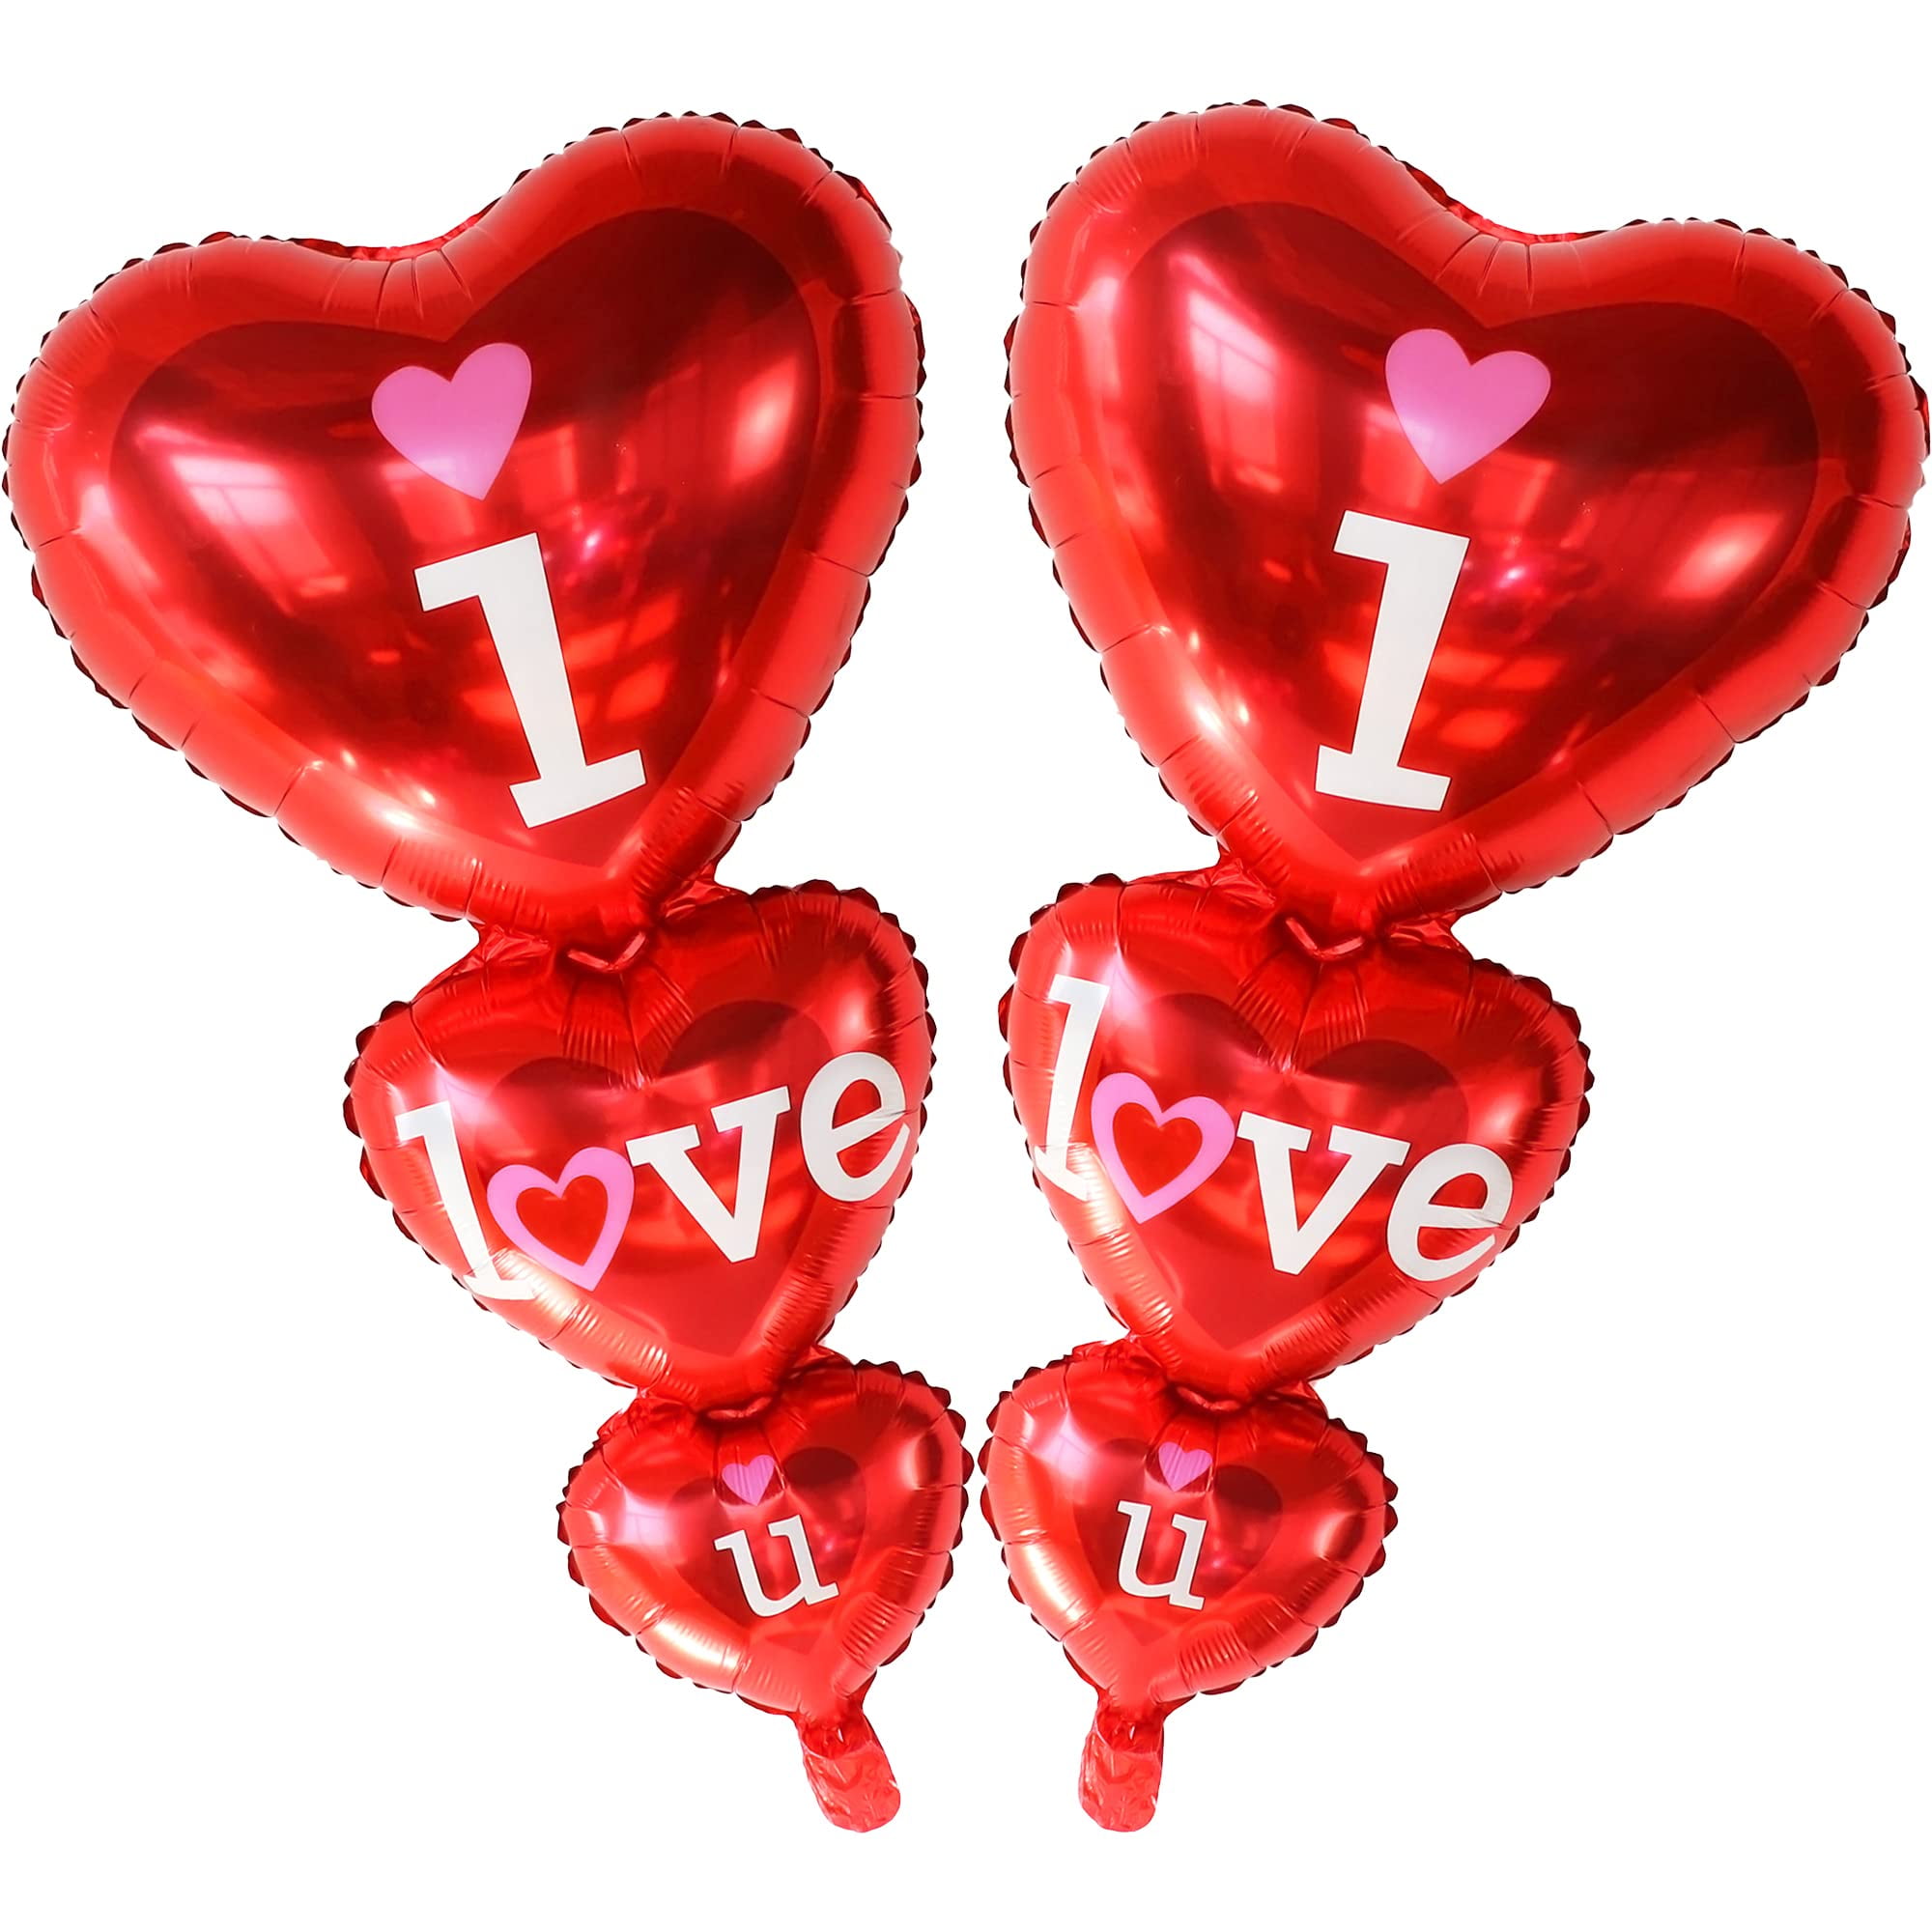 10 I Love You Red Hearts Valentine's Day Latex Balloon Party Decor 12'' 